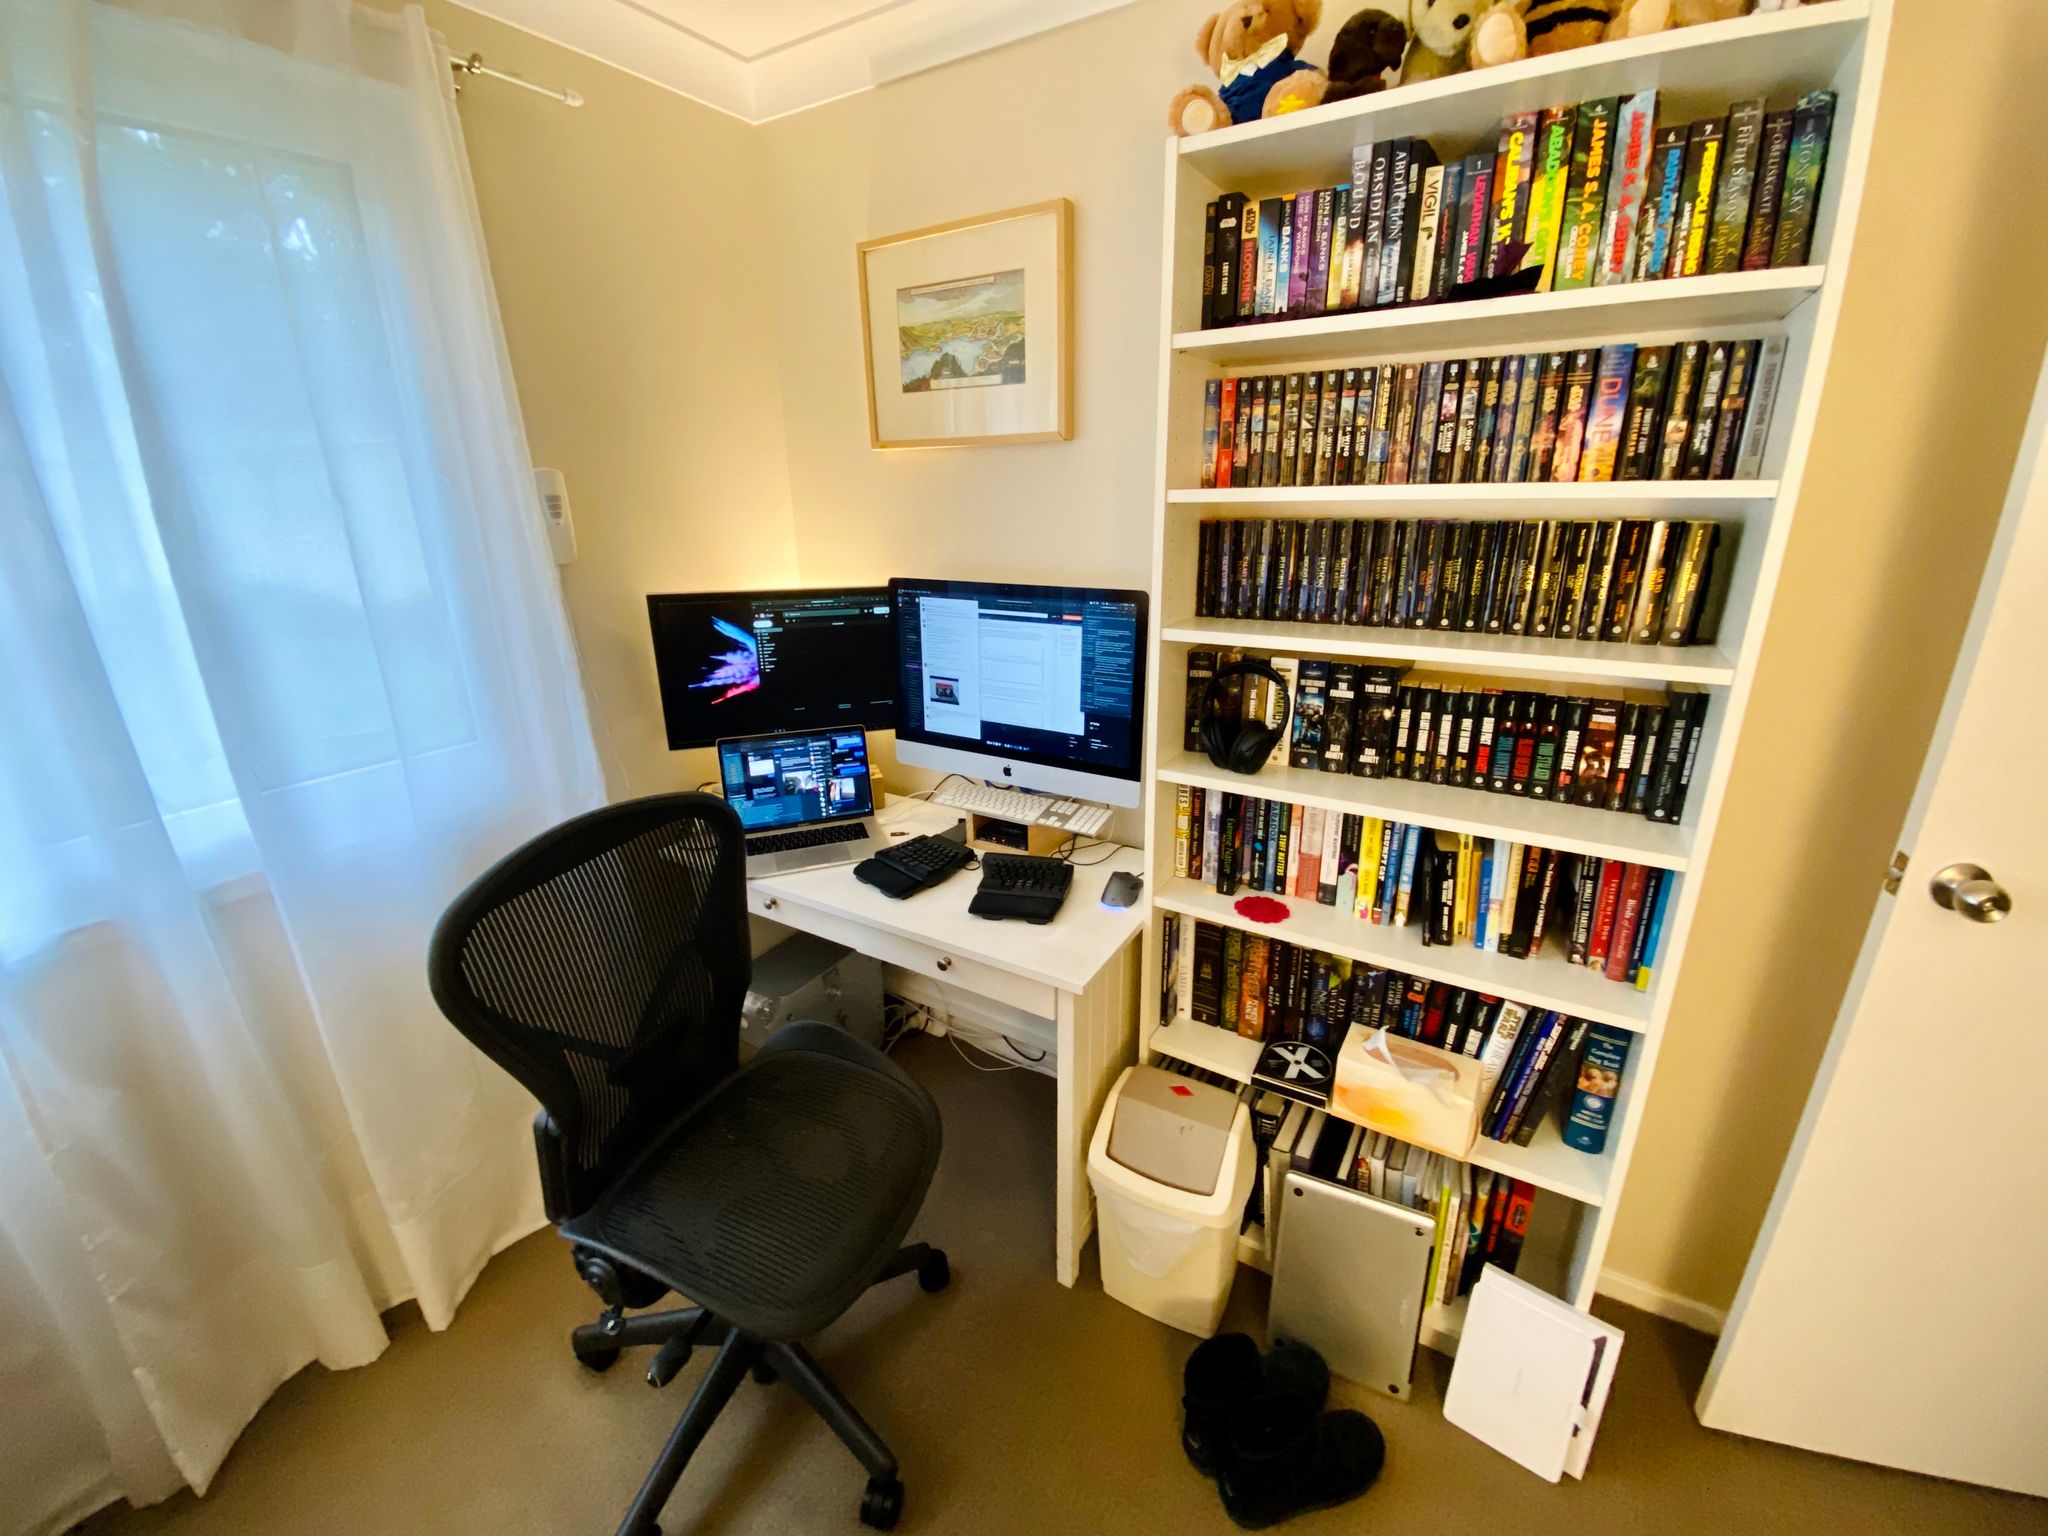 A photo of a computer desk in the corner of a room next to a bookshelf full of books. The desk has an iMac, a 24" monitor, and a MacBook Pro sitting on it.